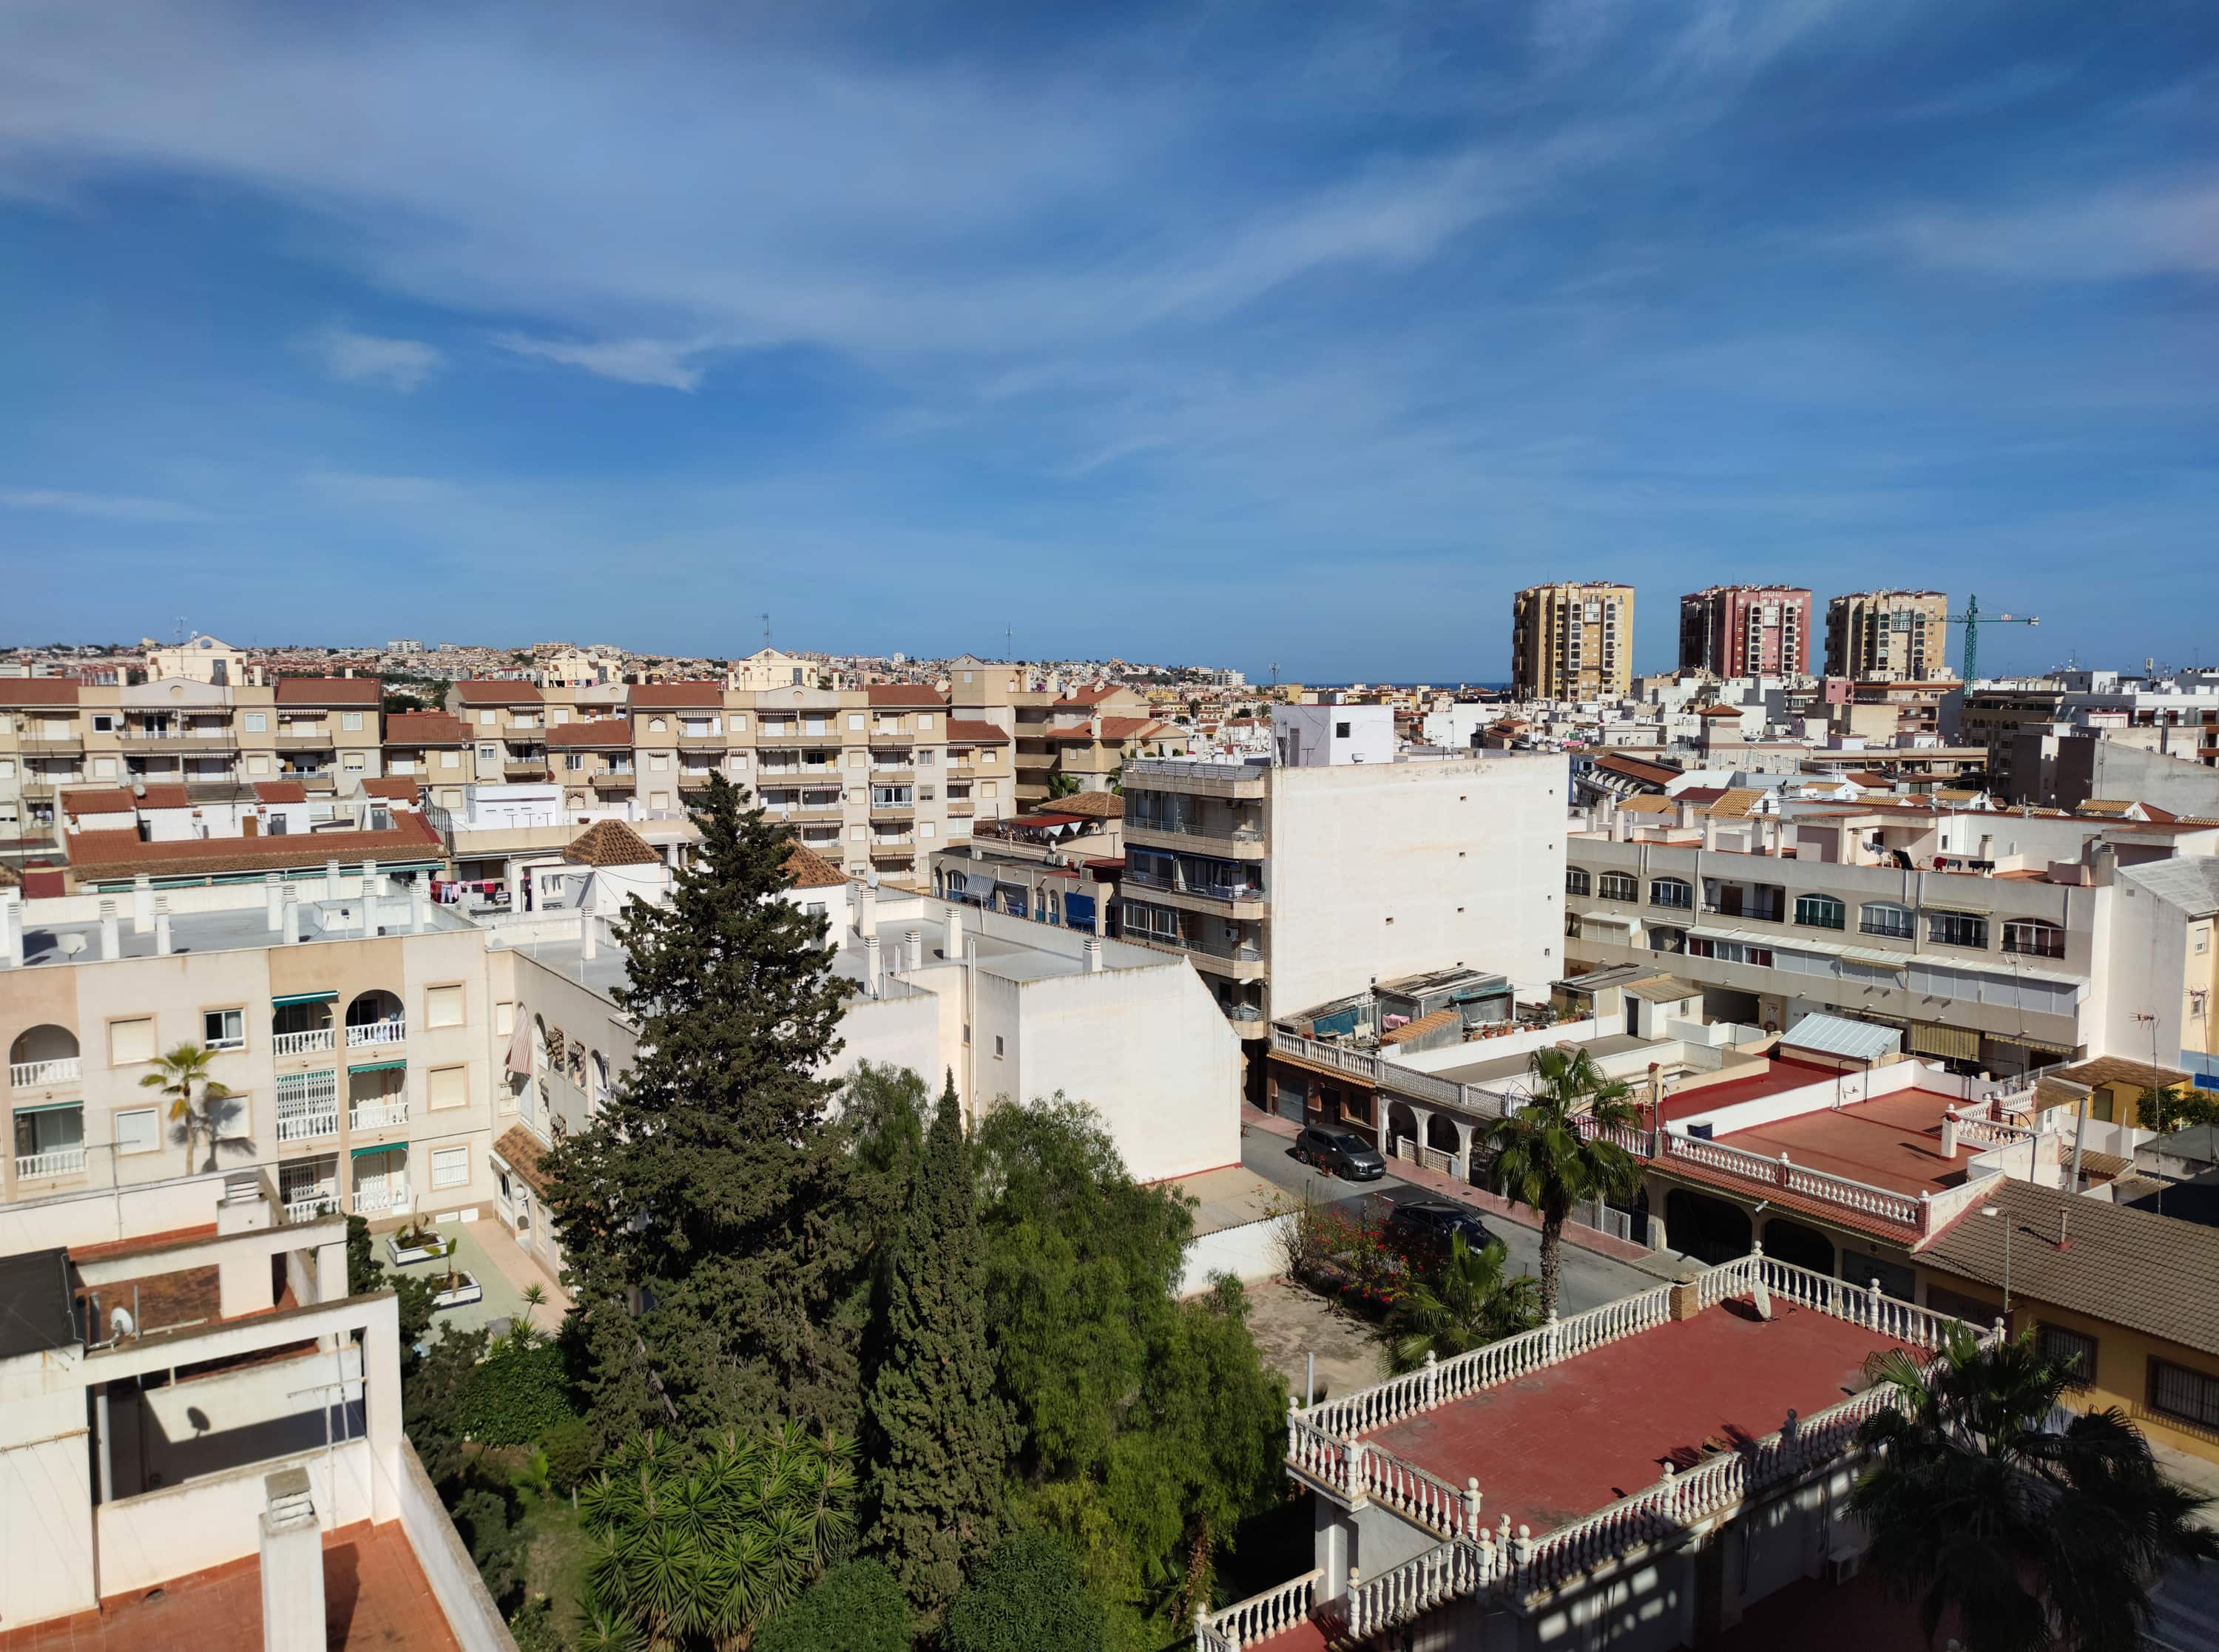 Torrevieja, Spain. Panorama from the roof of the 4-storey building.